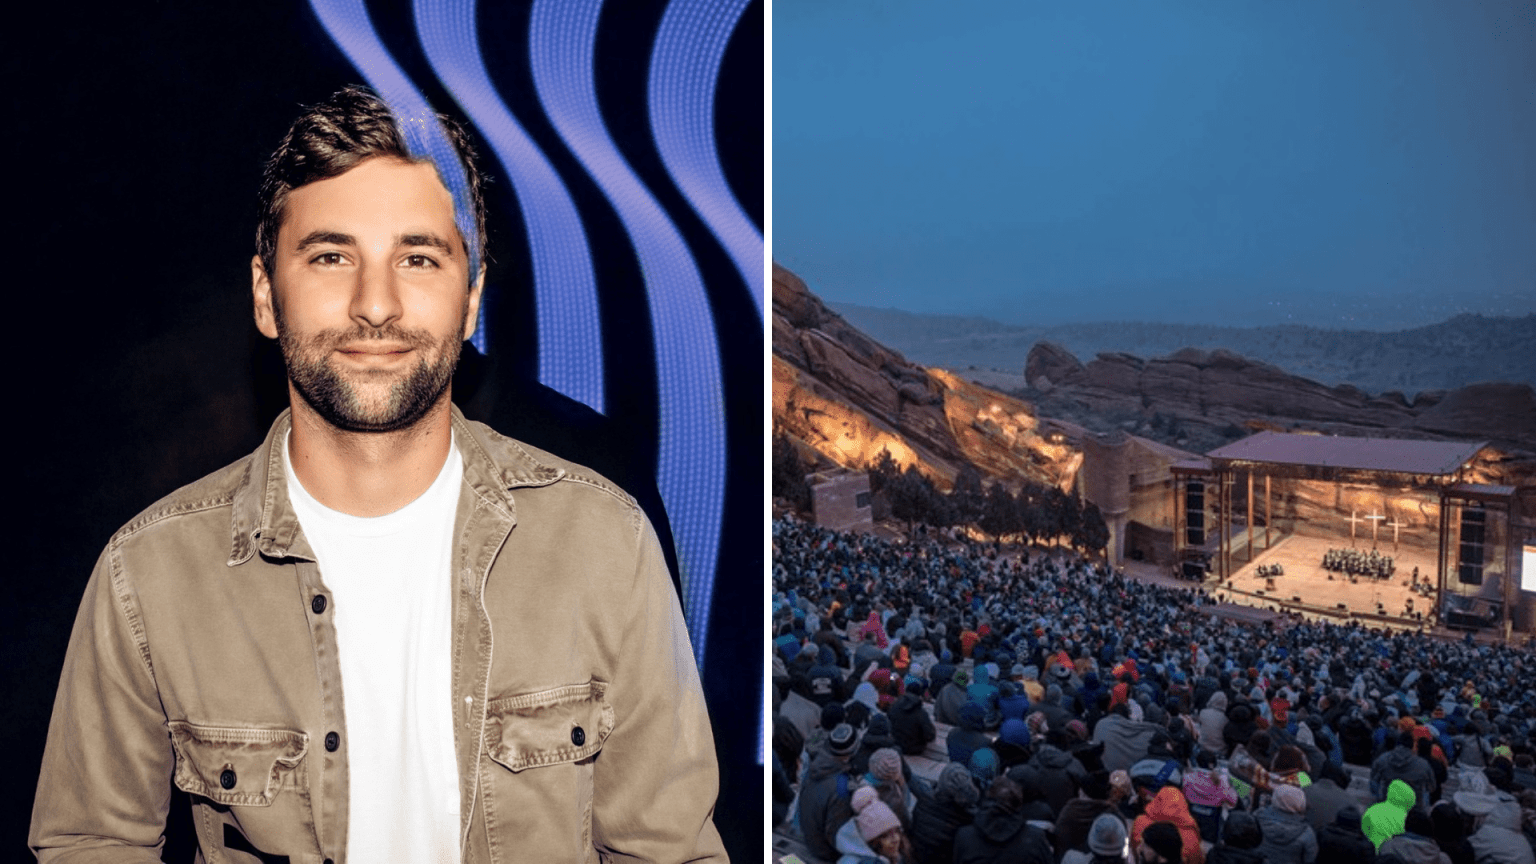 Lane 8 announces ‘This Never Happened’ event at Red Rocks this October